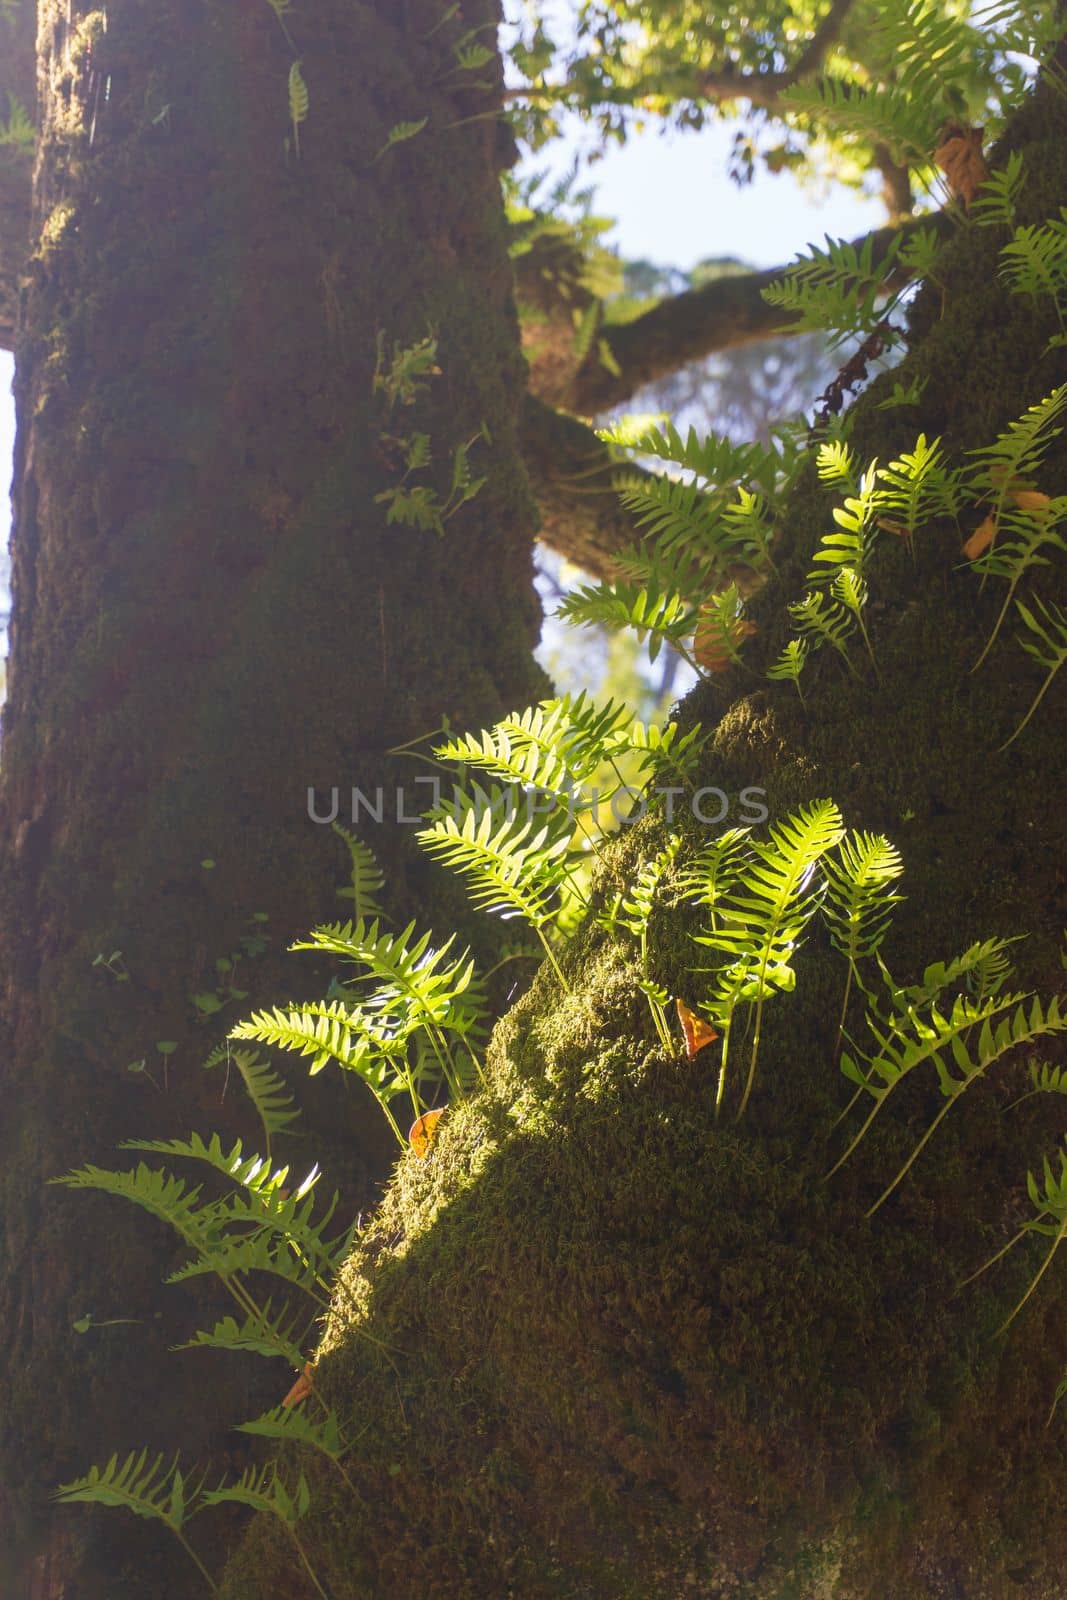 Young fern leaves germinated on a tree trunk by Challlenger